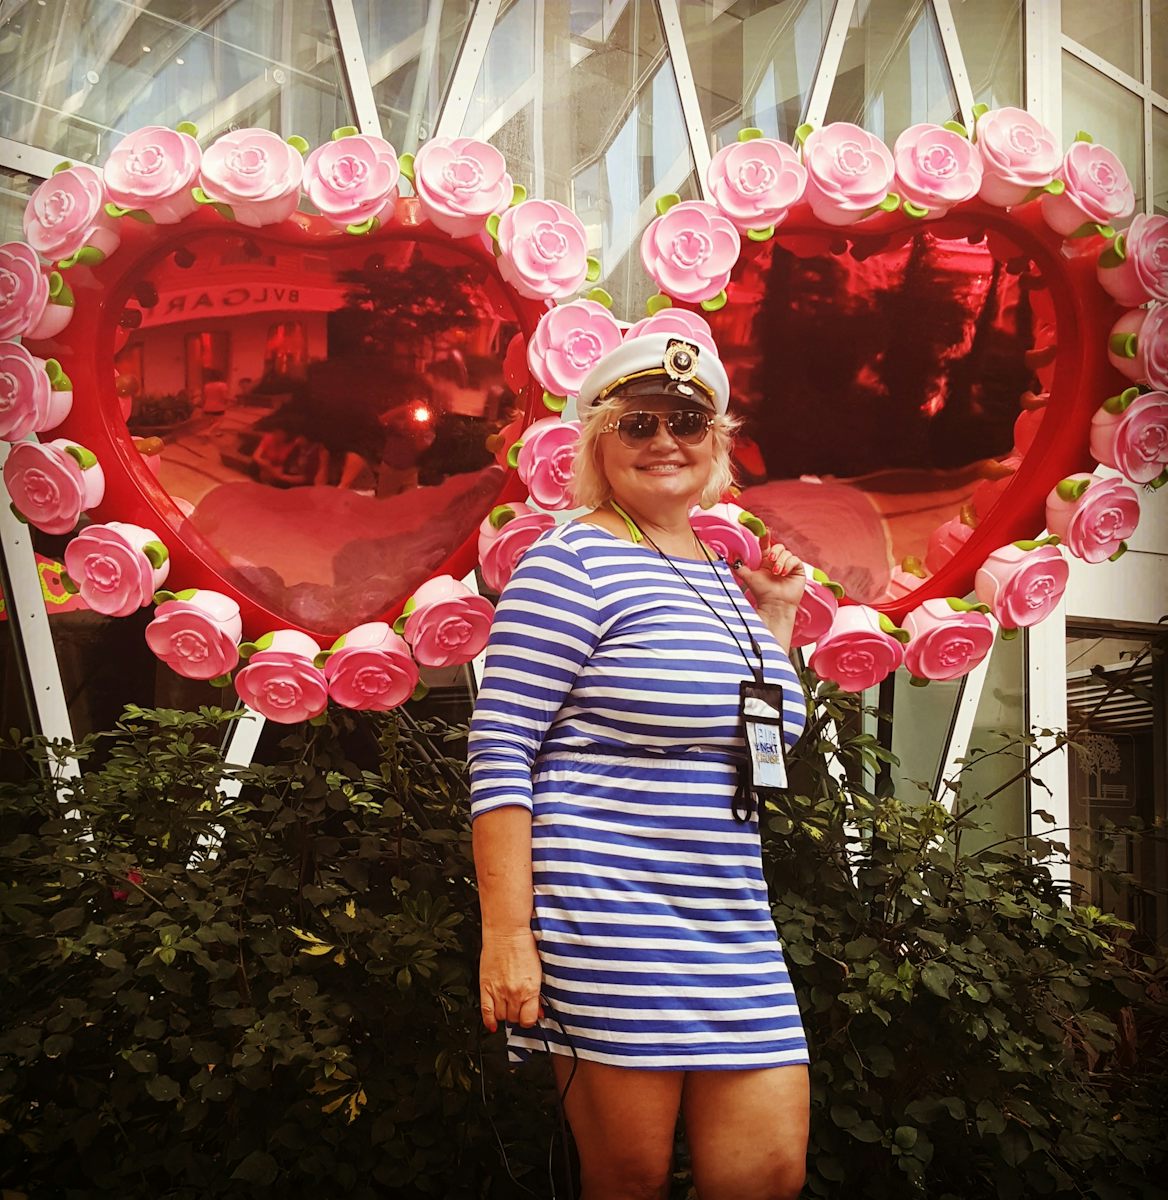 I love this dolce Gabbana sunglasses in central park